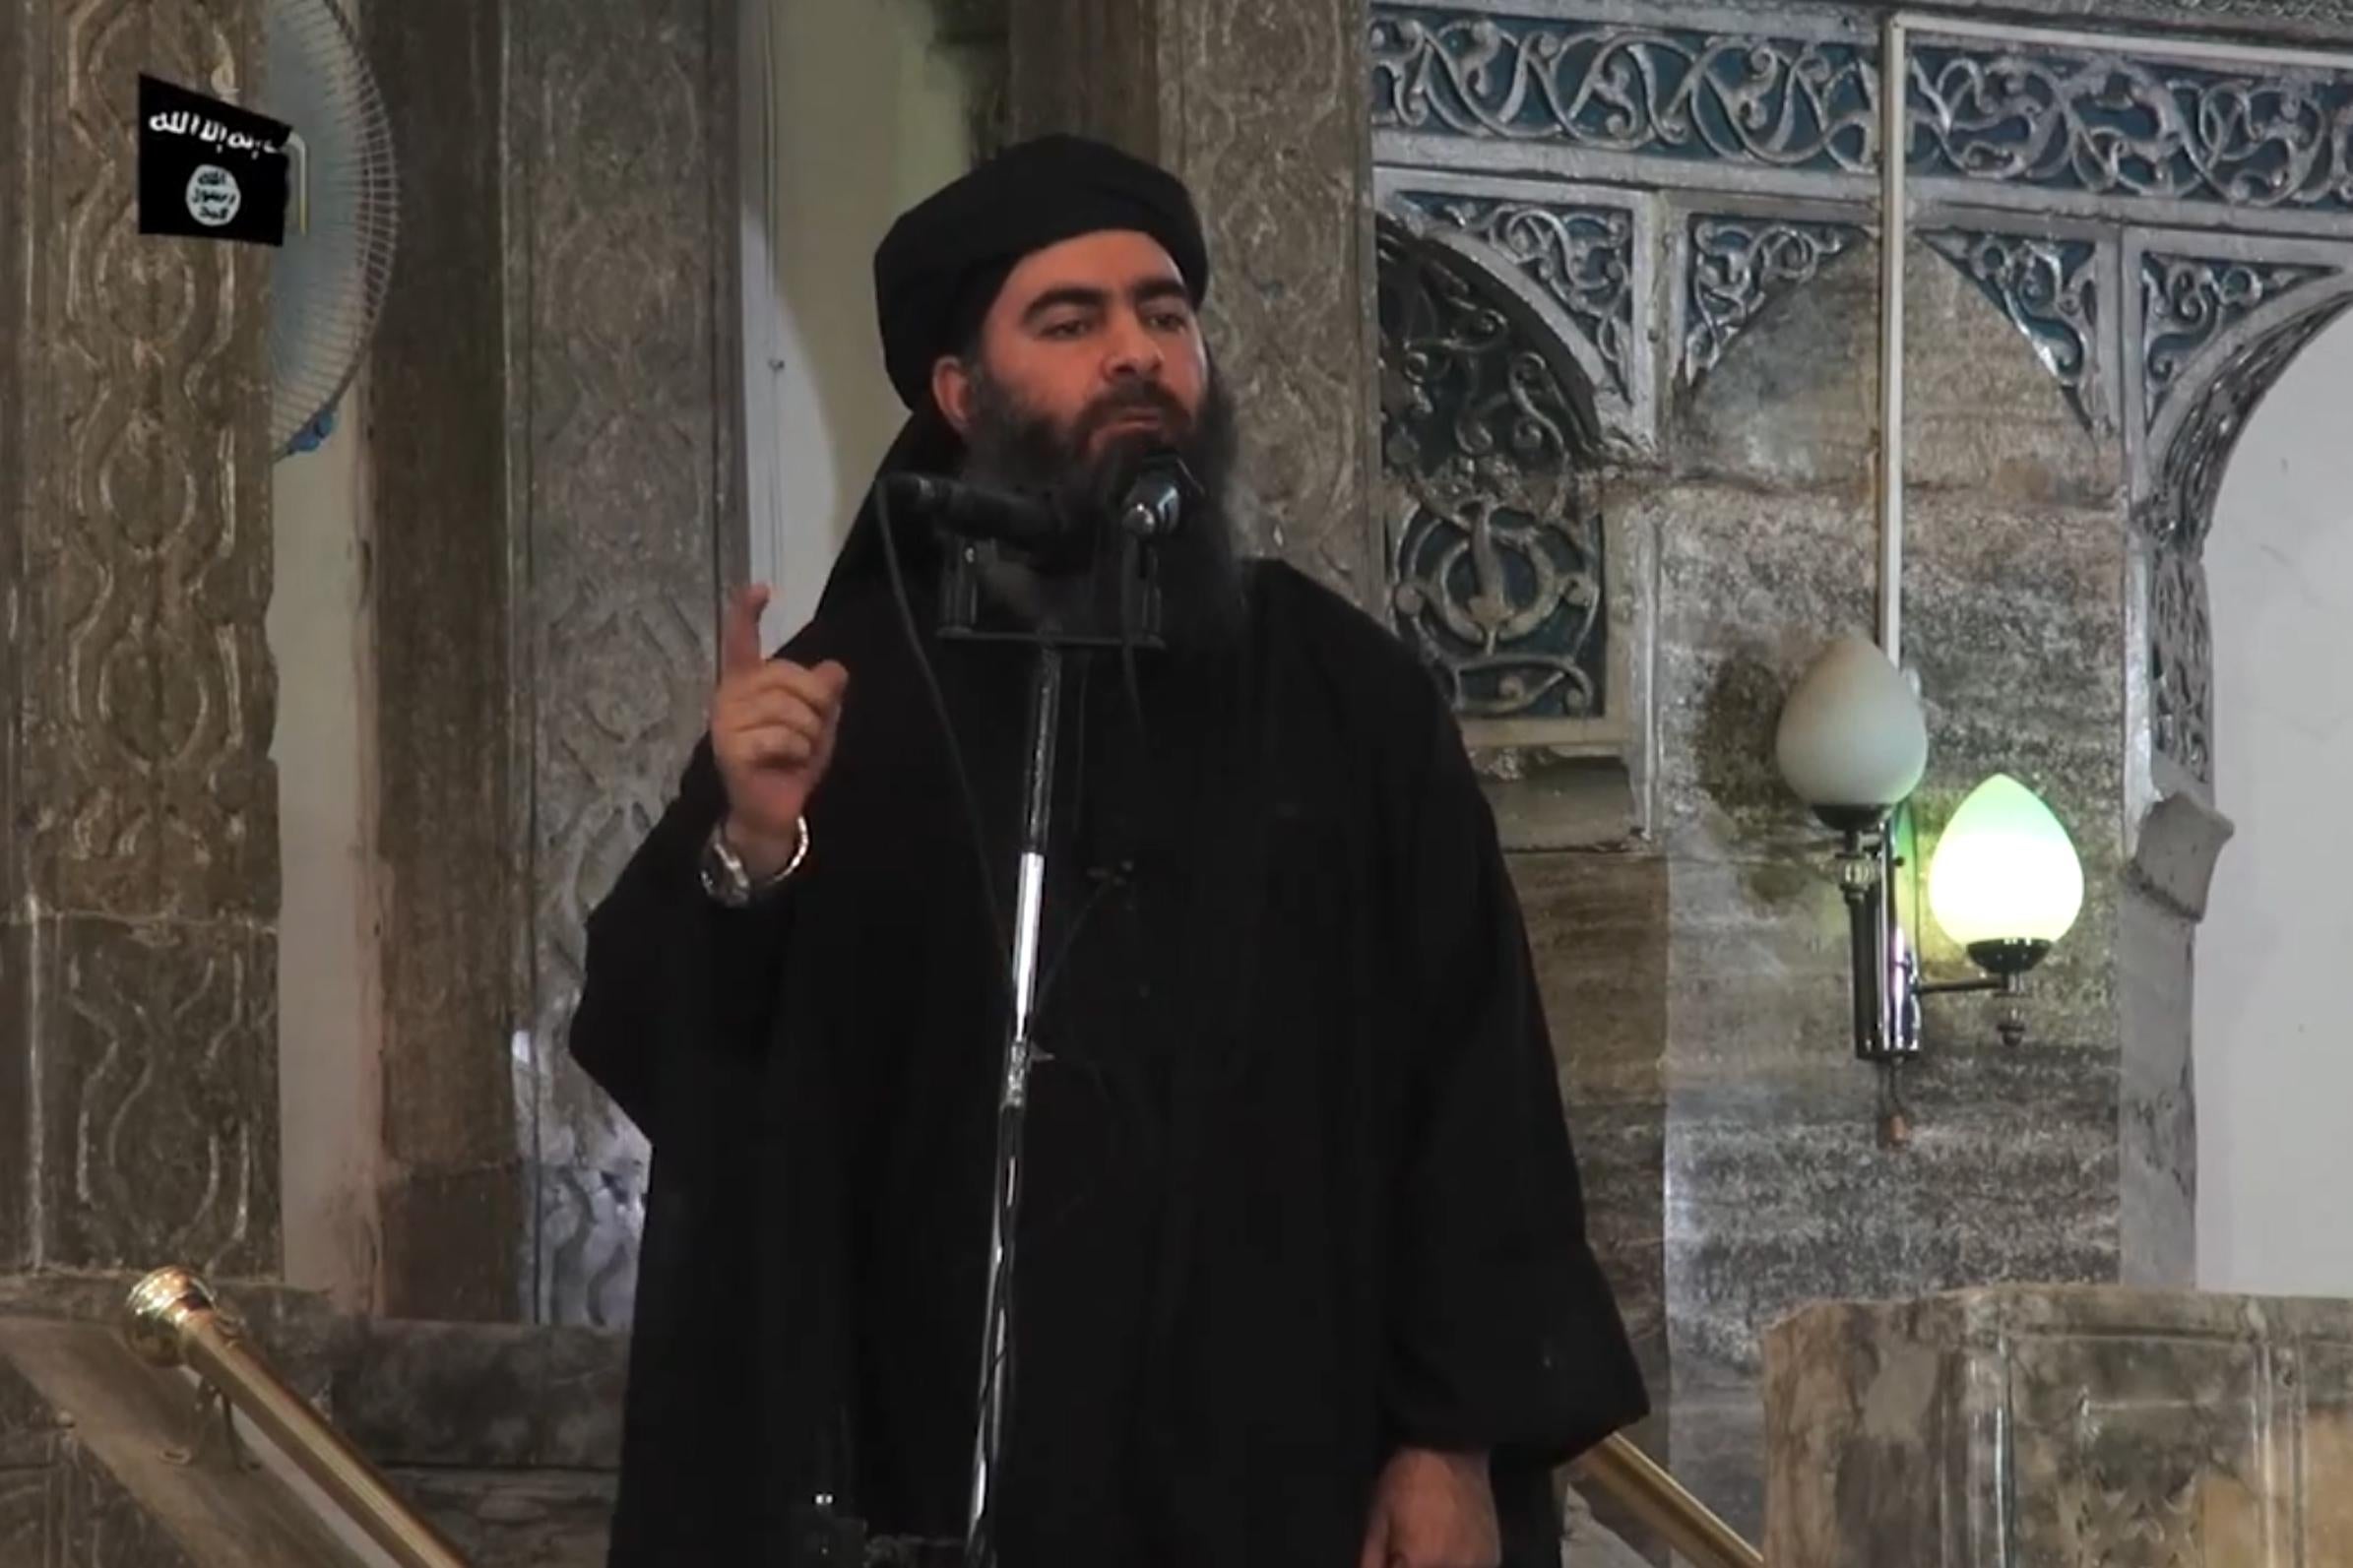 In this file picture taken on July 5, 2014, an image grab taken from a propaganda video released by al-Furqan Media allegedly shows the leader of the Islamic State (IS) jihadist group, Abu Bakr al-Baghdadi, aka Caliph Ibrahim, adressing Muslim worshippers at a mosque in the militant-held northern Iraqi city of Mosul. - Kurdish-led forces announced on March 23, 2019 they had fully captured the Islamic State group's last bastion in eastern Syria and declared the total elimination of the jihadists' "caliphate."